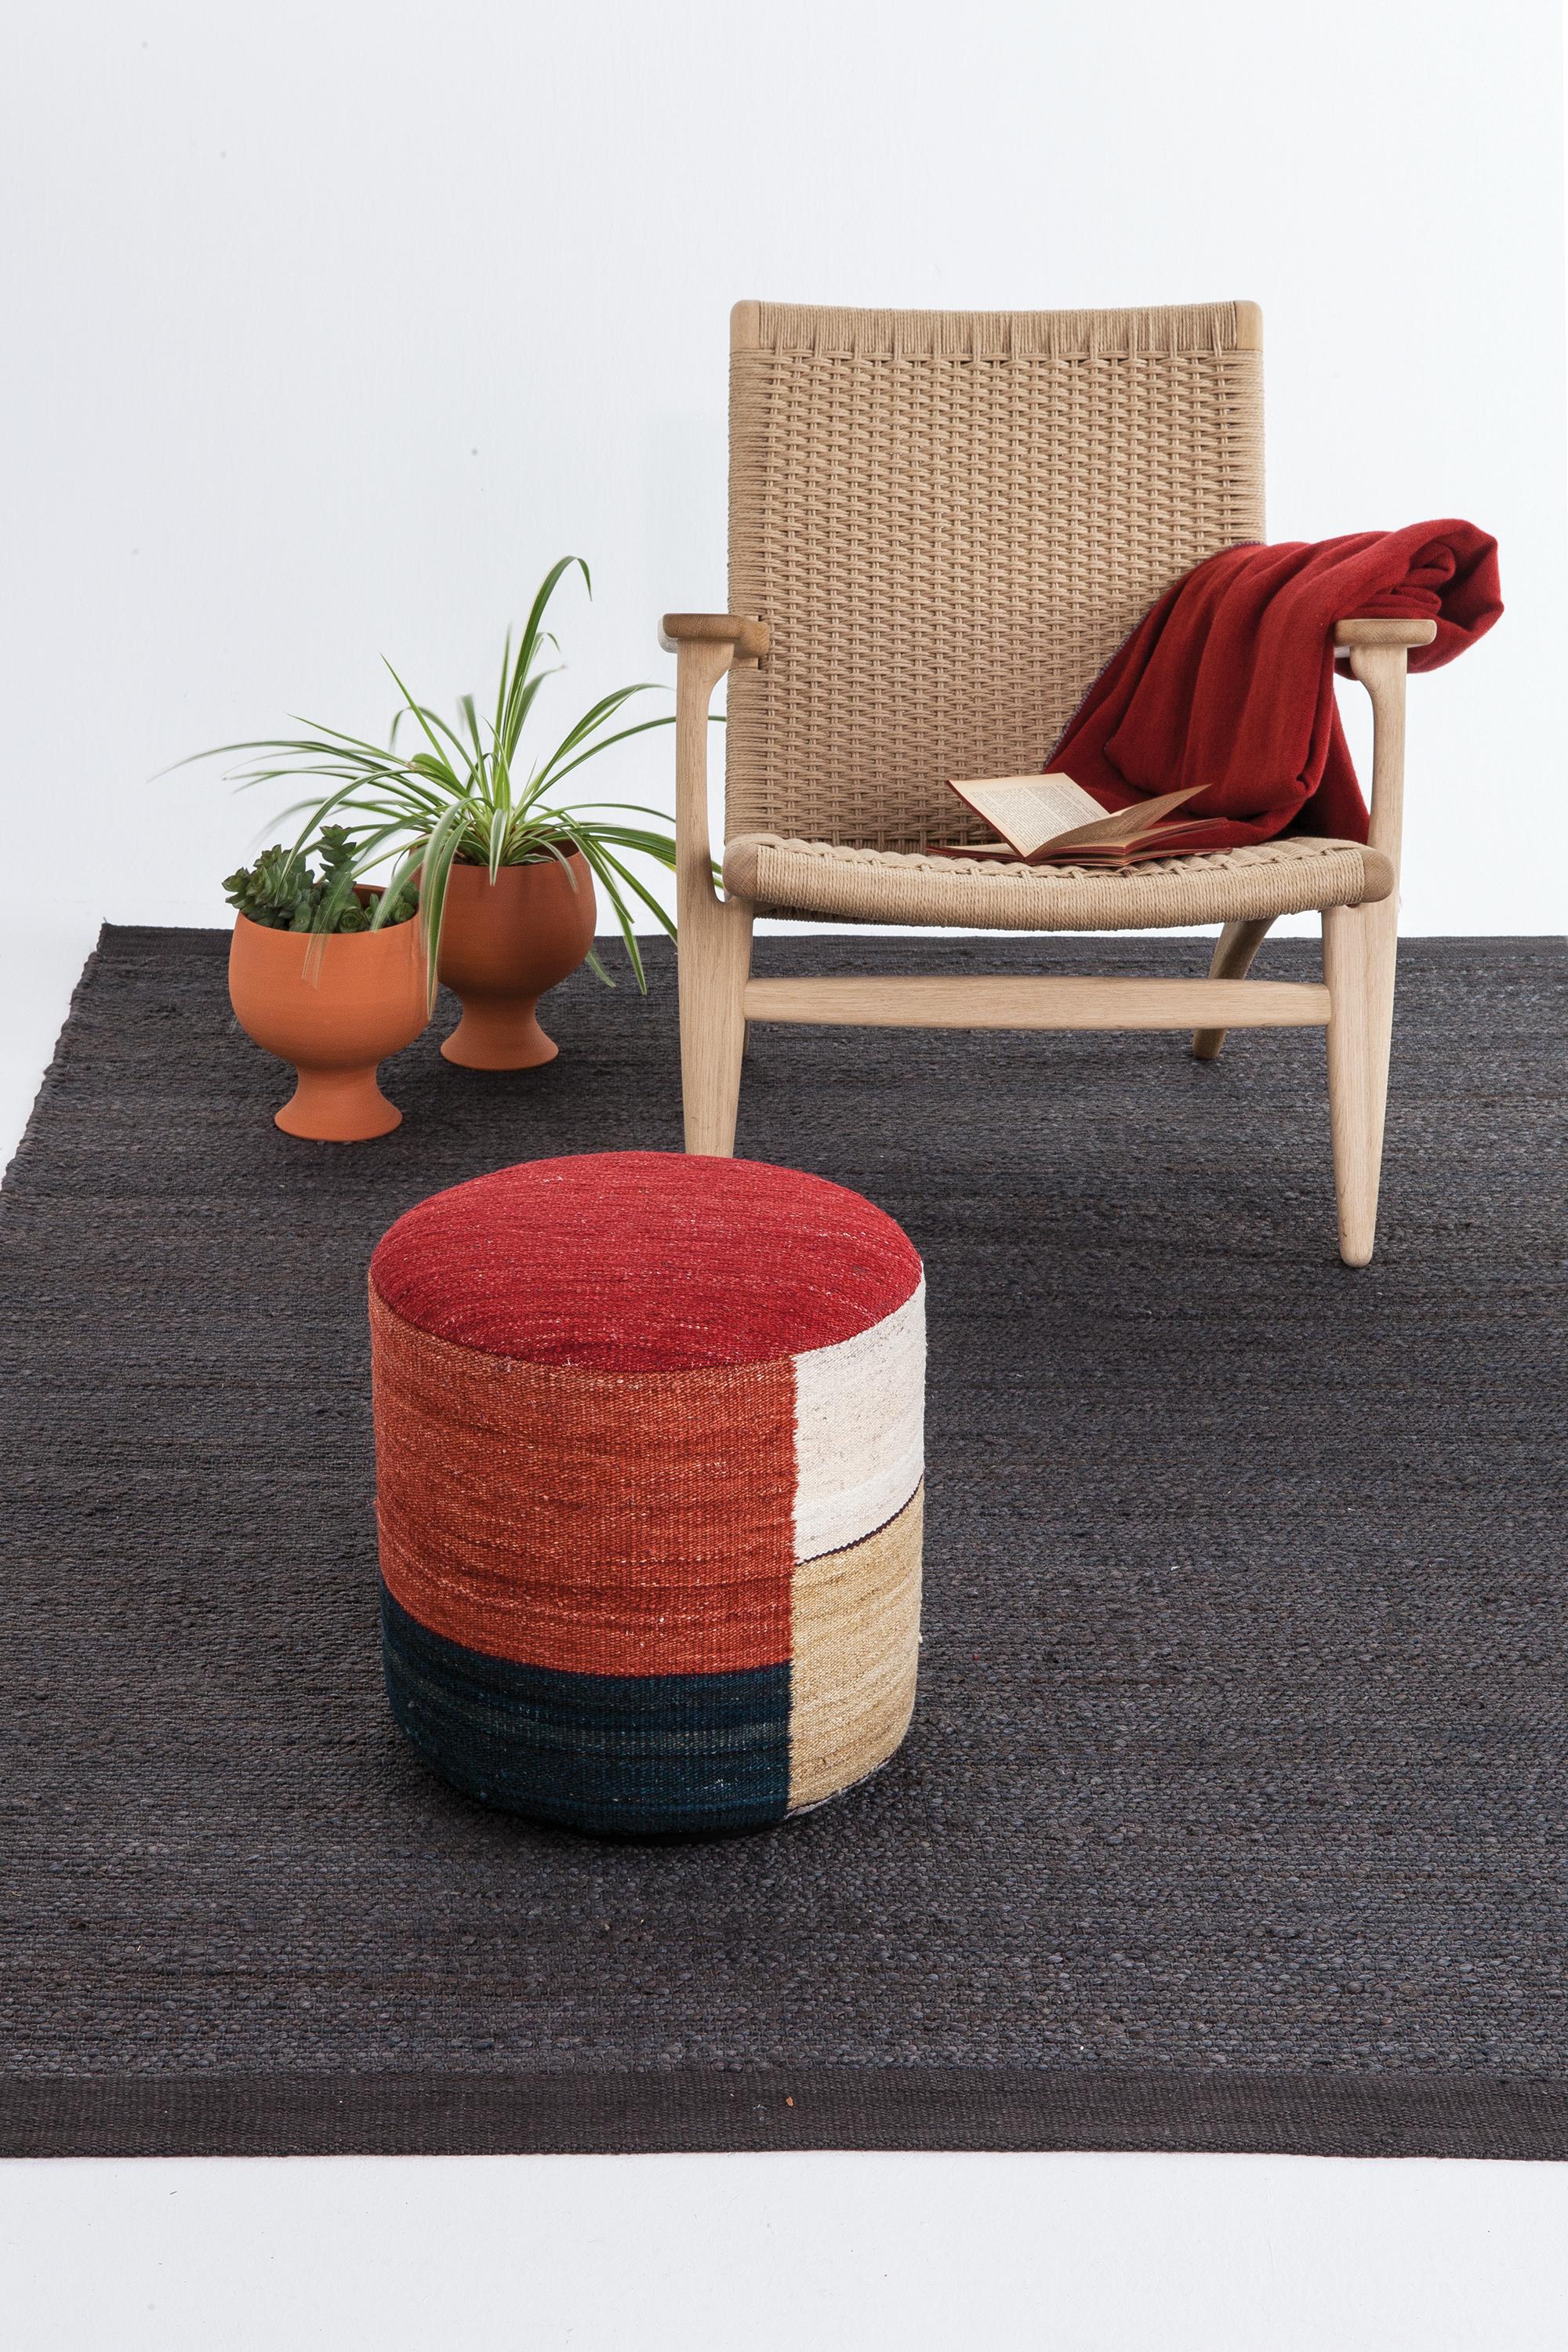 'Kilim 3' Pouf by Nani Marquina and Marcos Catalán for Nanimarquina.

Executed in 100% hand-spun Afghan wool with a birch base and flame-retardant filling, this decorative accessory is the perfect way to add a touch of color to any room in the